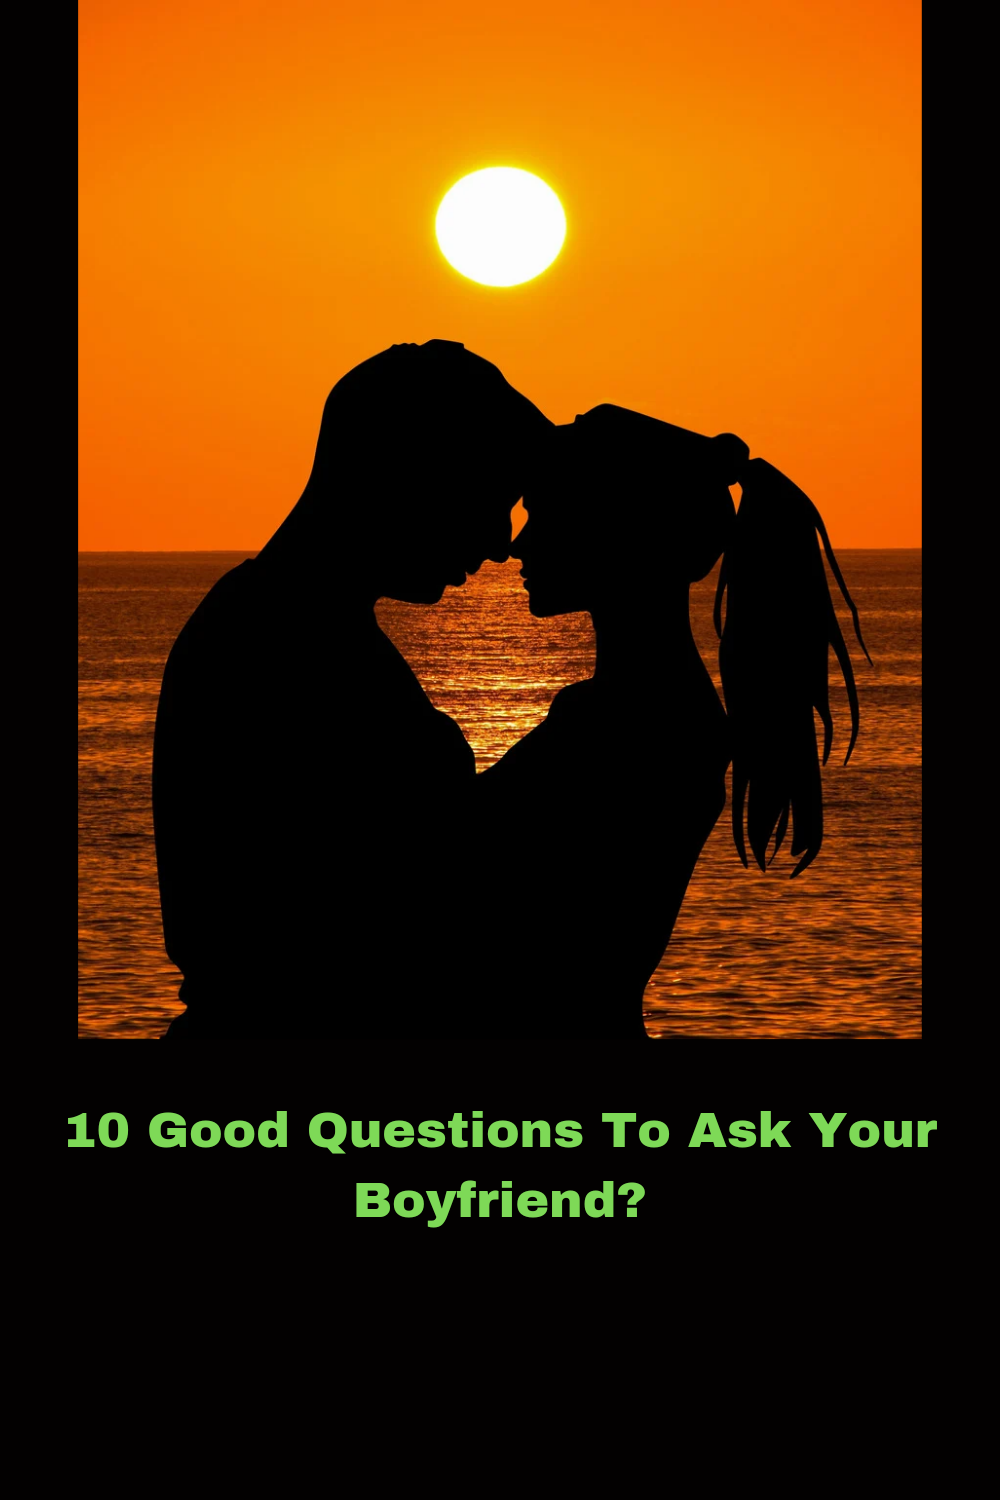 10 Good Questions To Ask Your Boyfriend